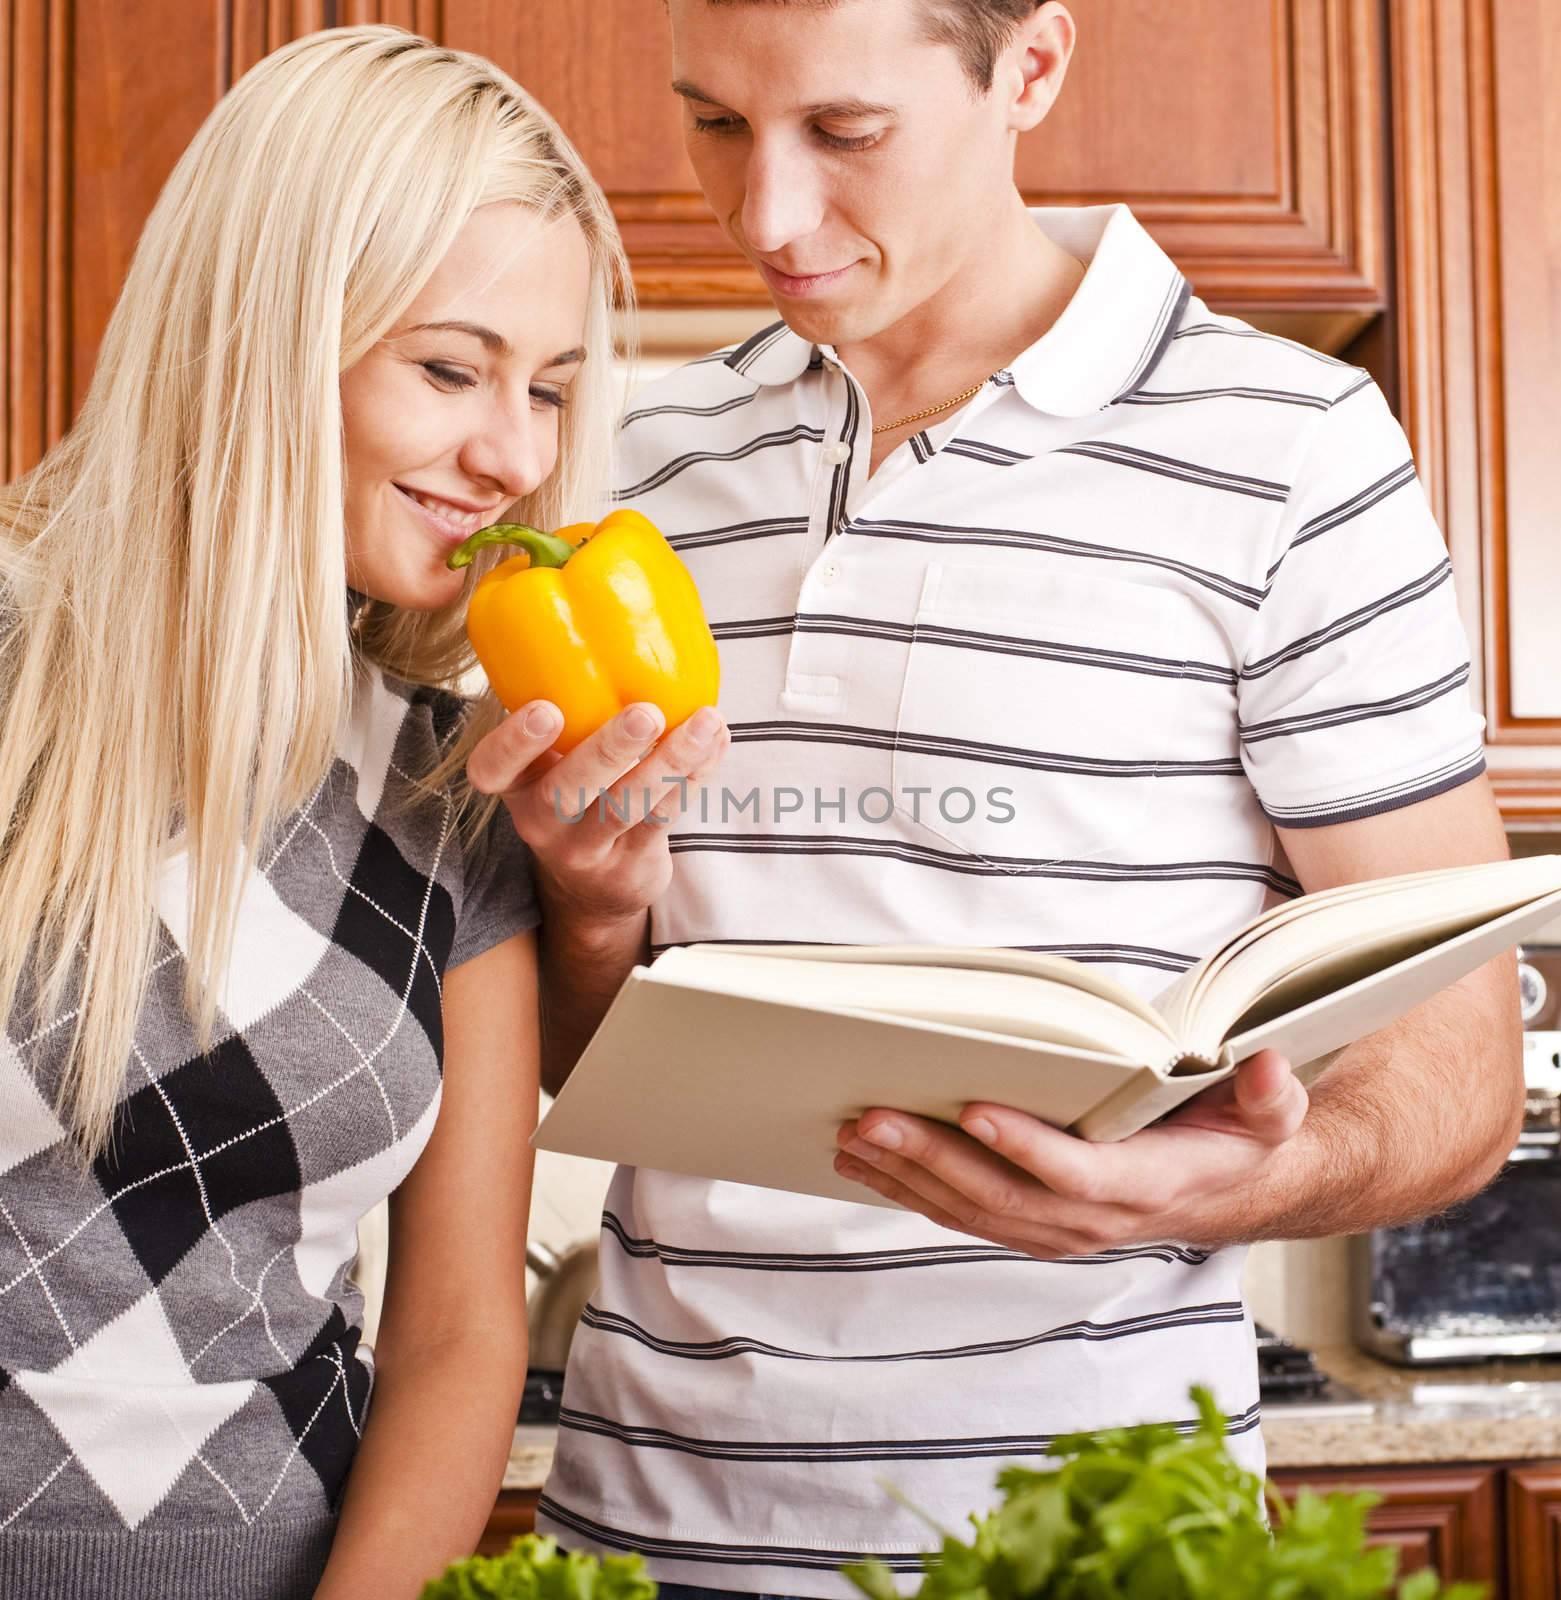 Young man with cook book holding yellow pepper for young woman to smell. Vertical shot.